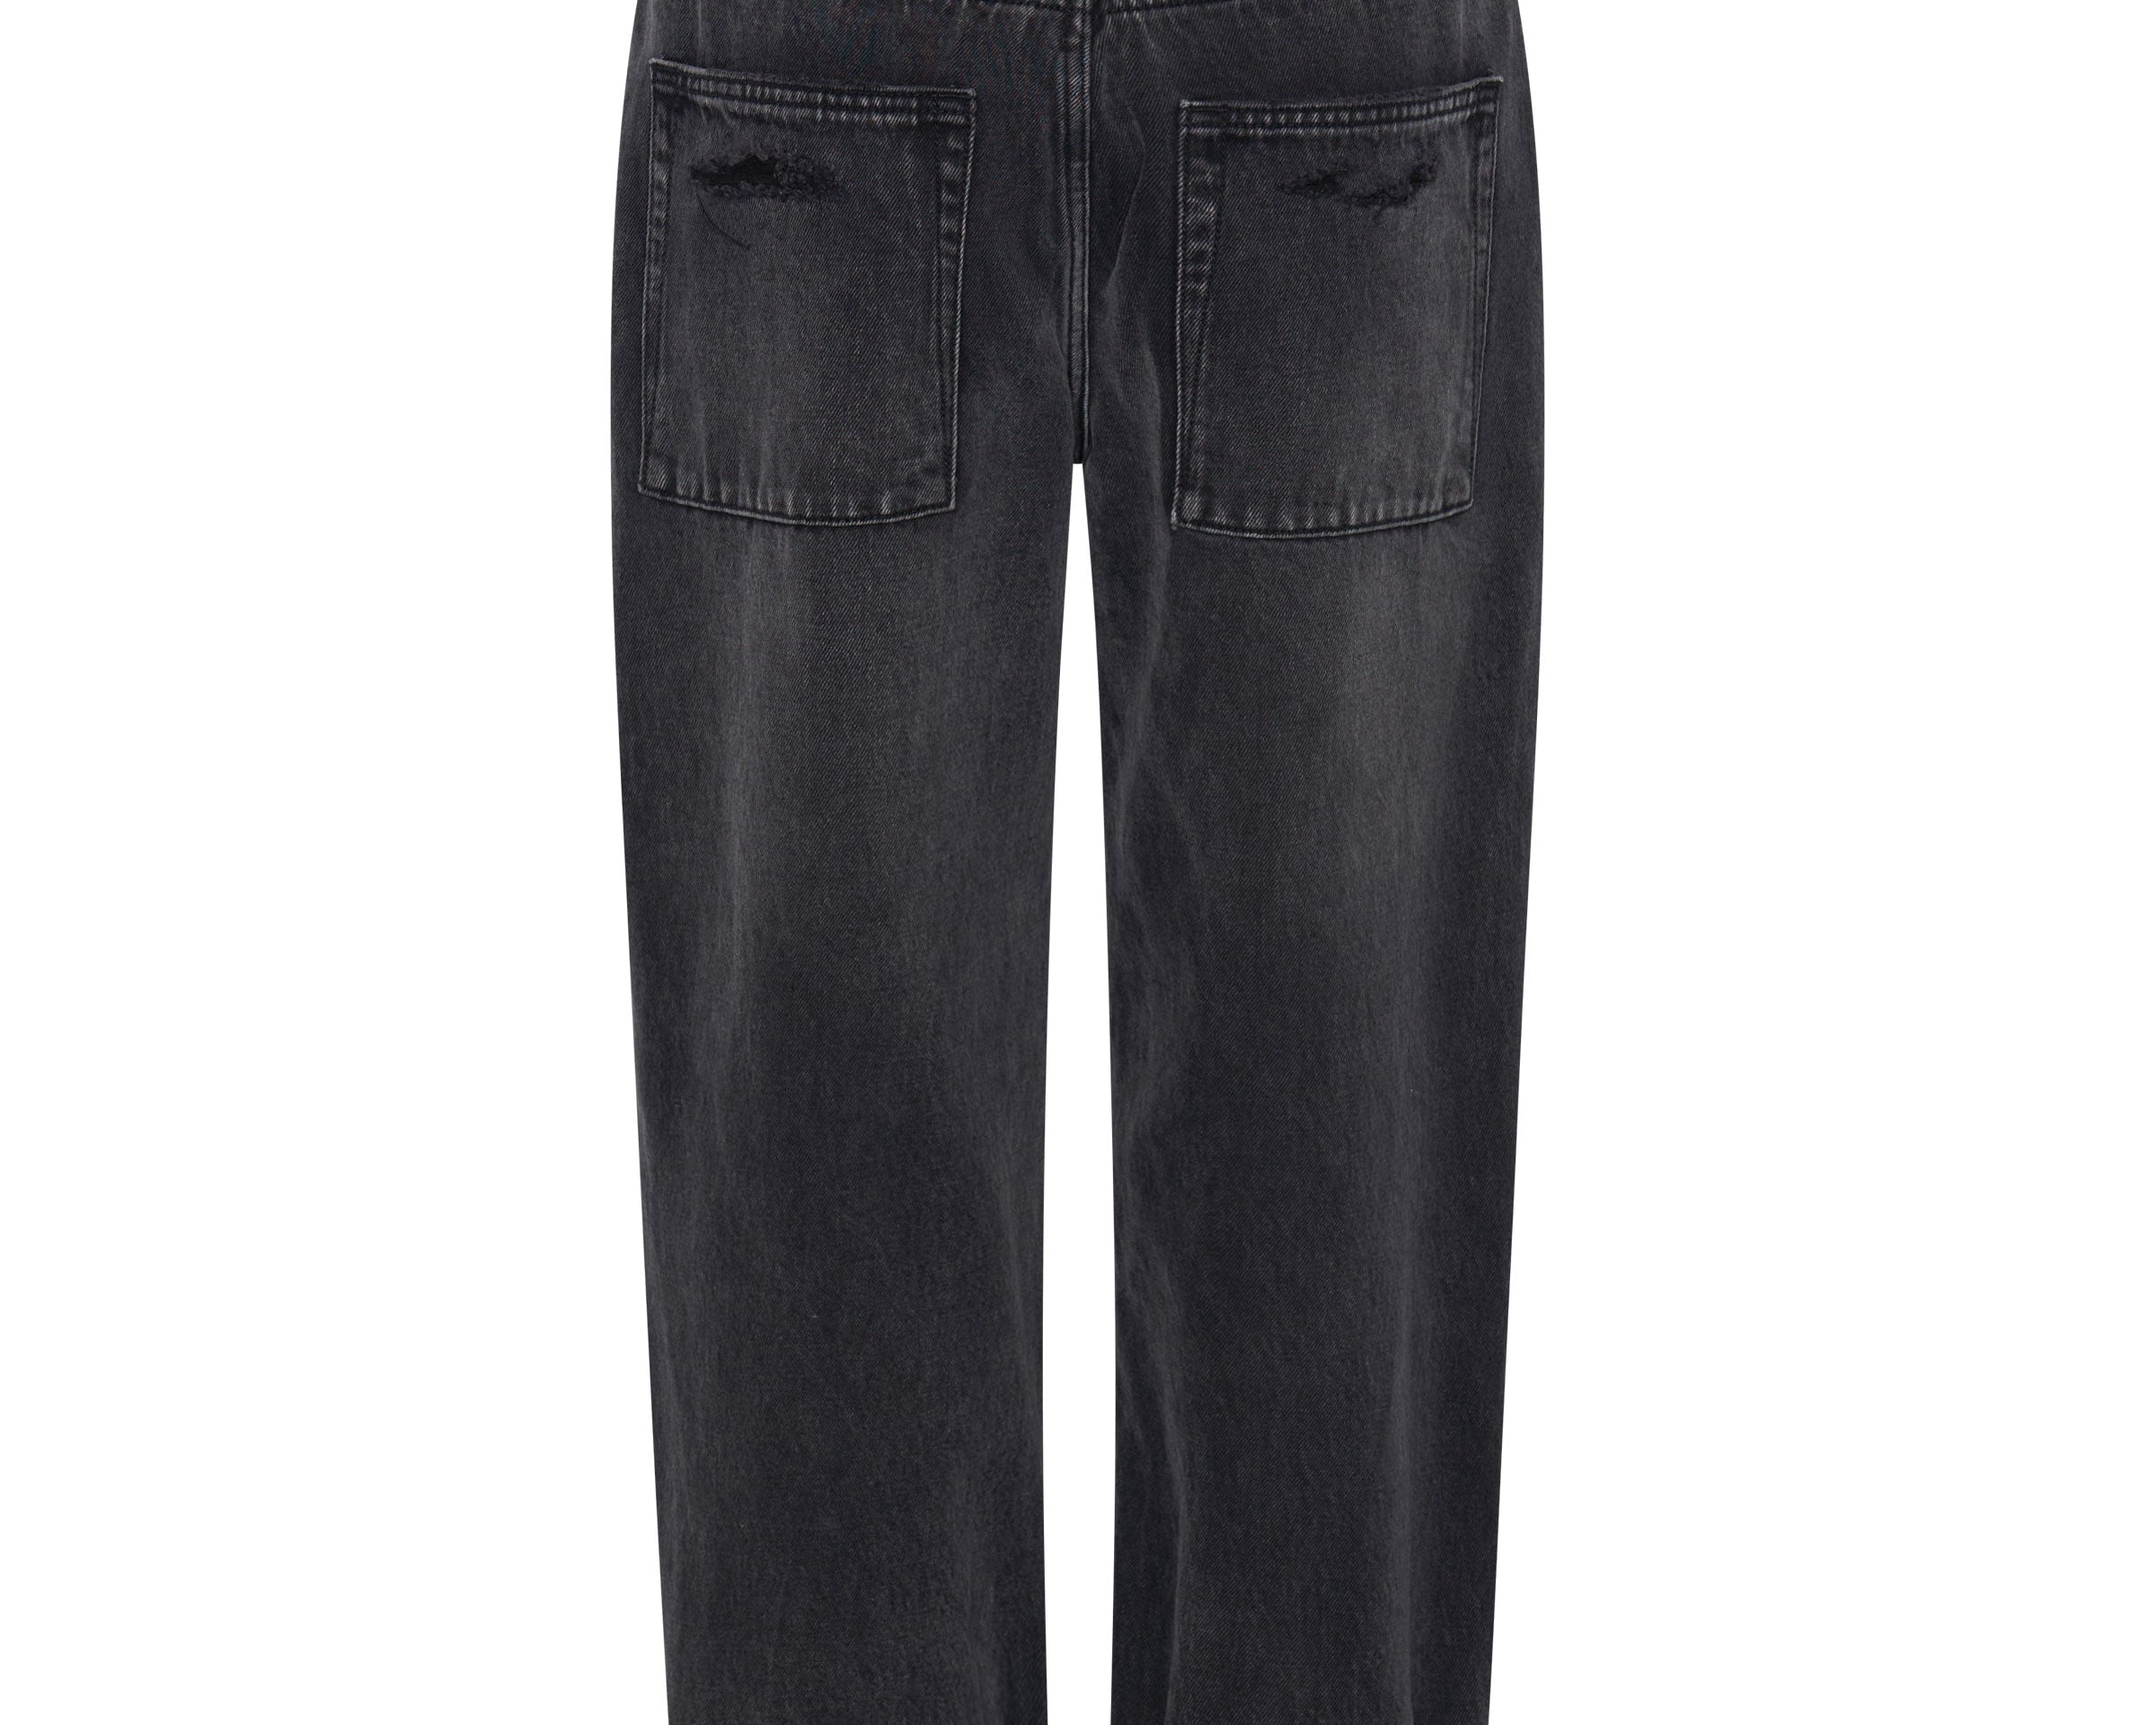 FADED BLACK SMITHS TROUSER JEANS